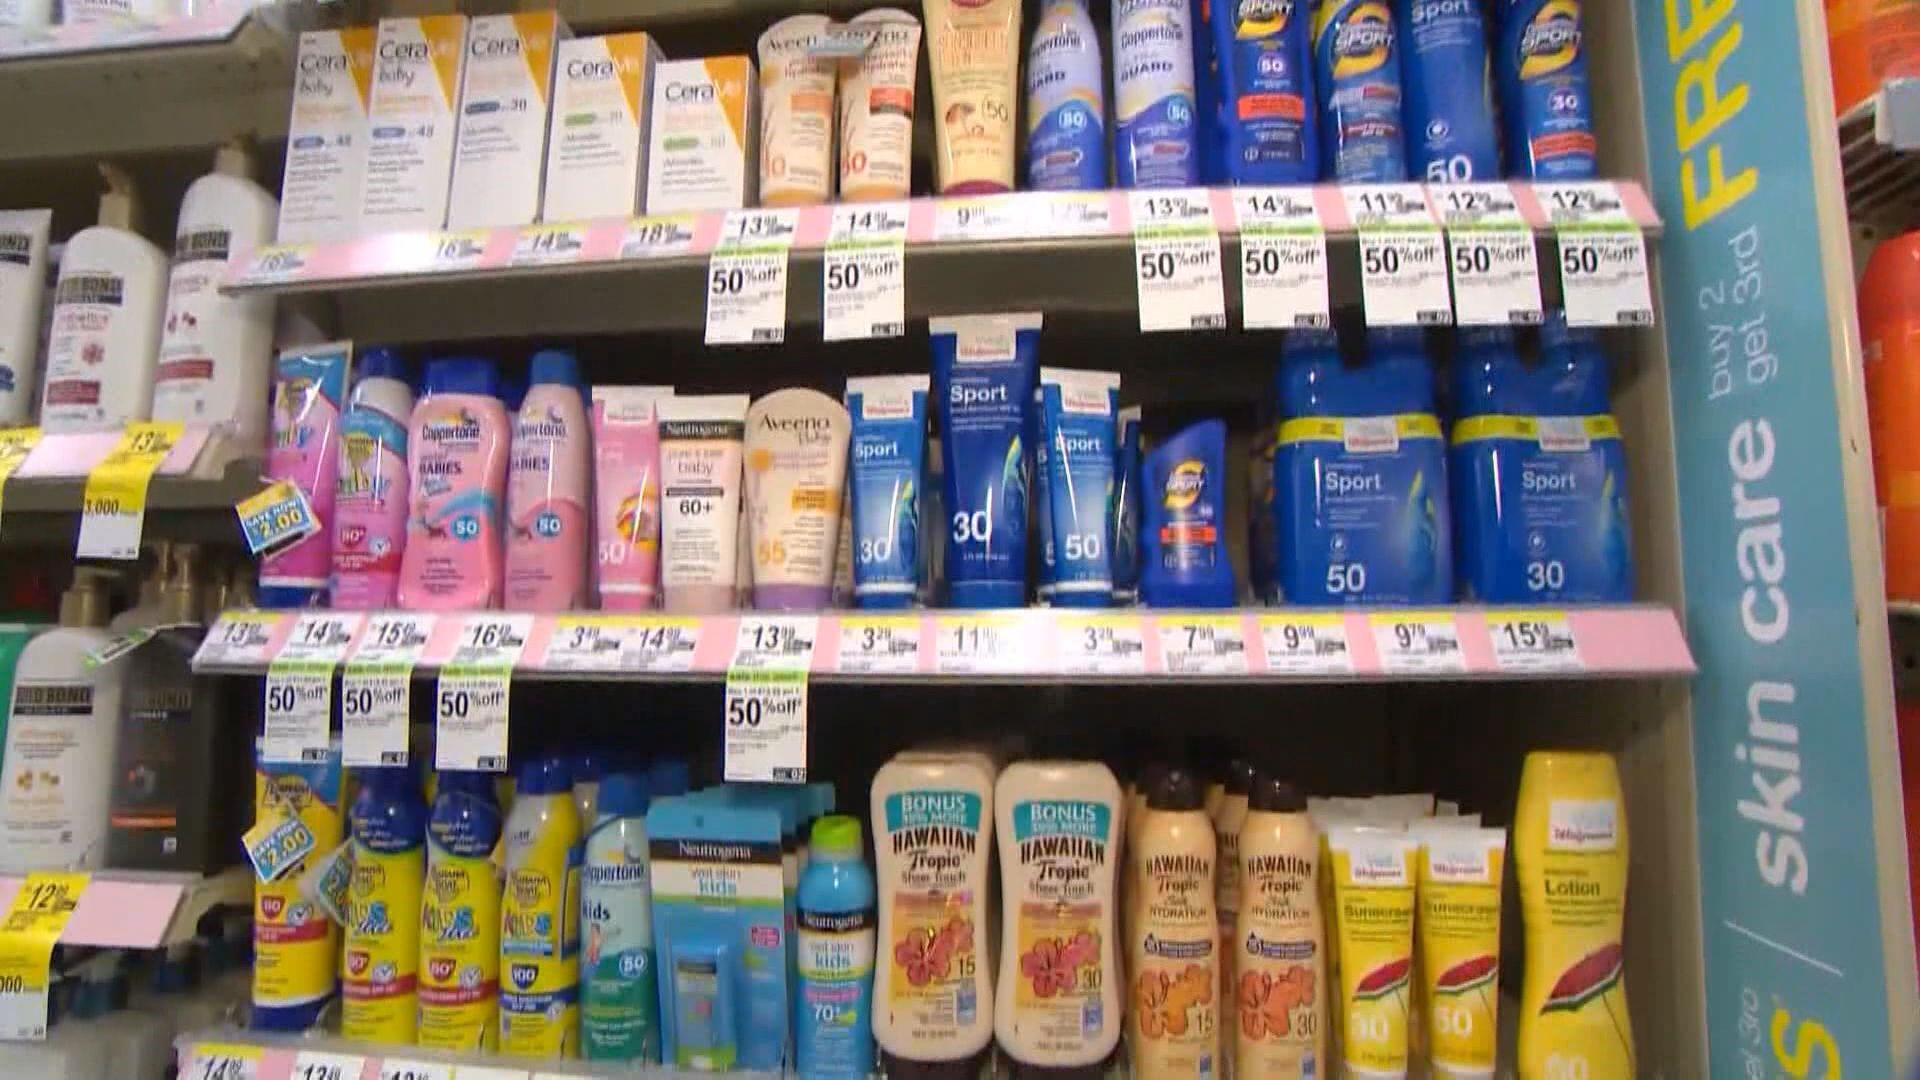 There are several different kinds of sunscreen, but not all of them provide the same protection.